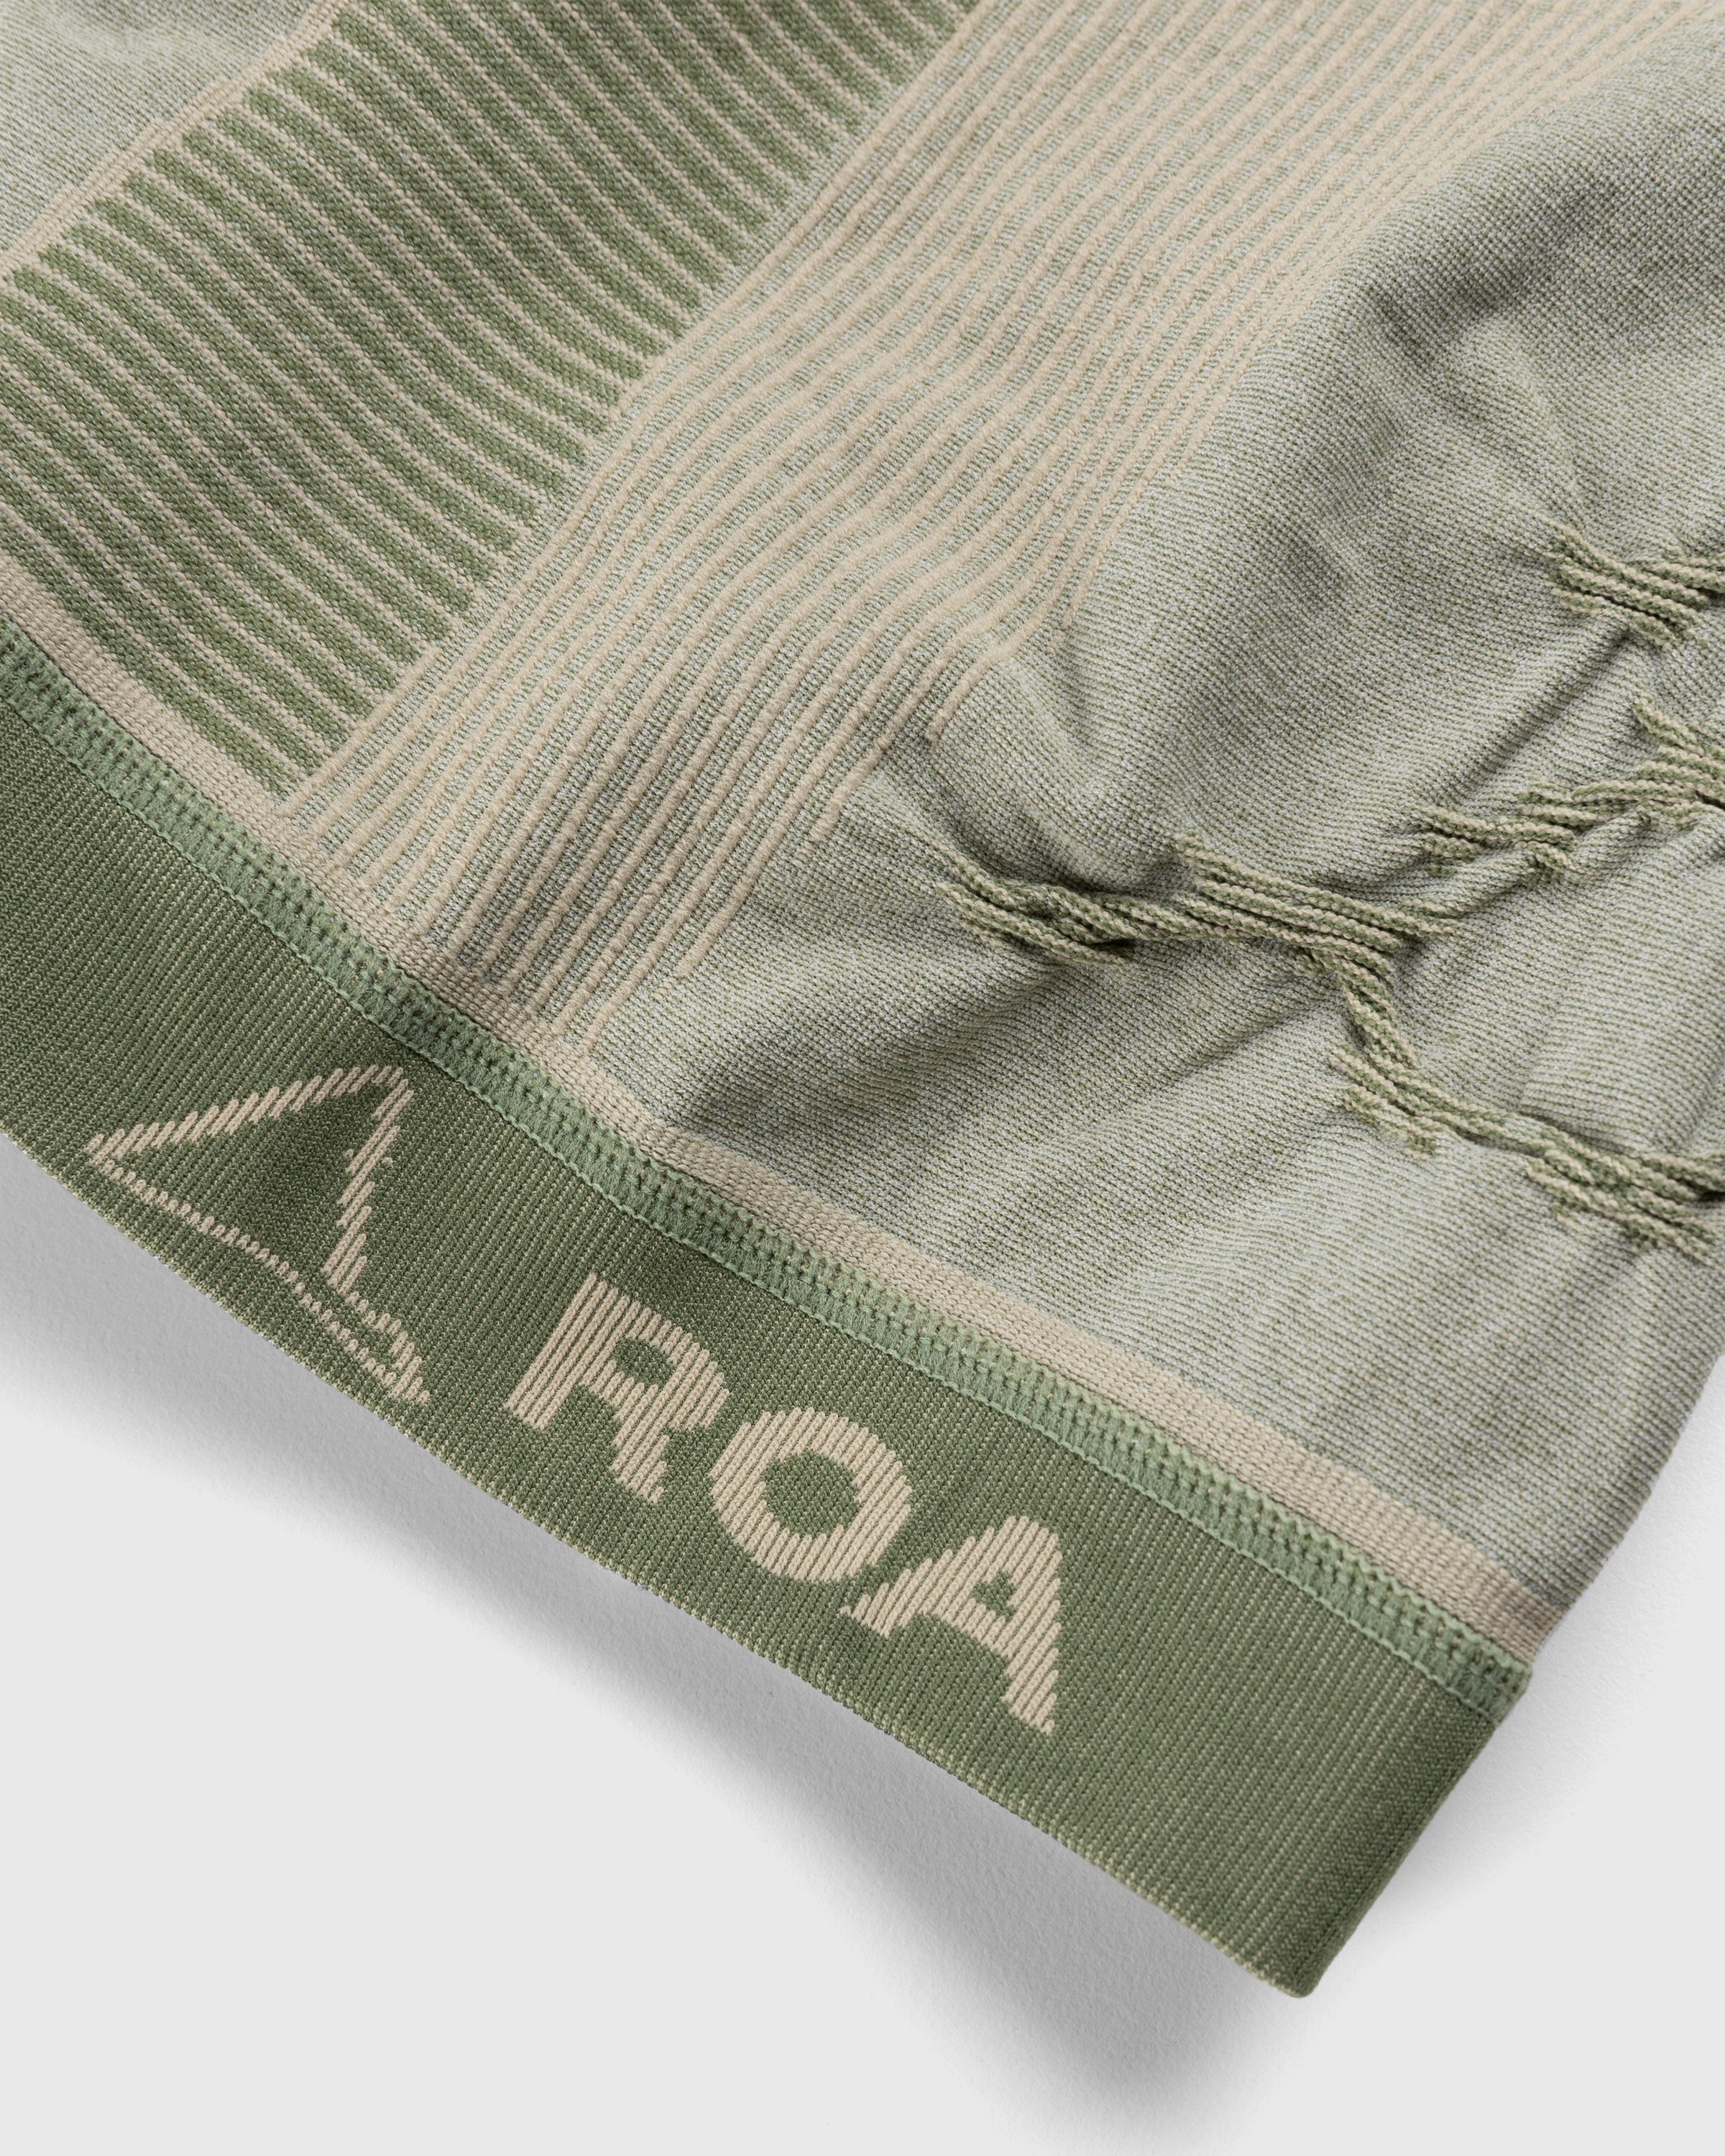 ROA - Tech Knit Olive - Clothing - Green - Image 5